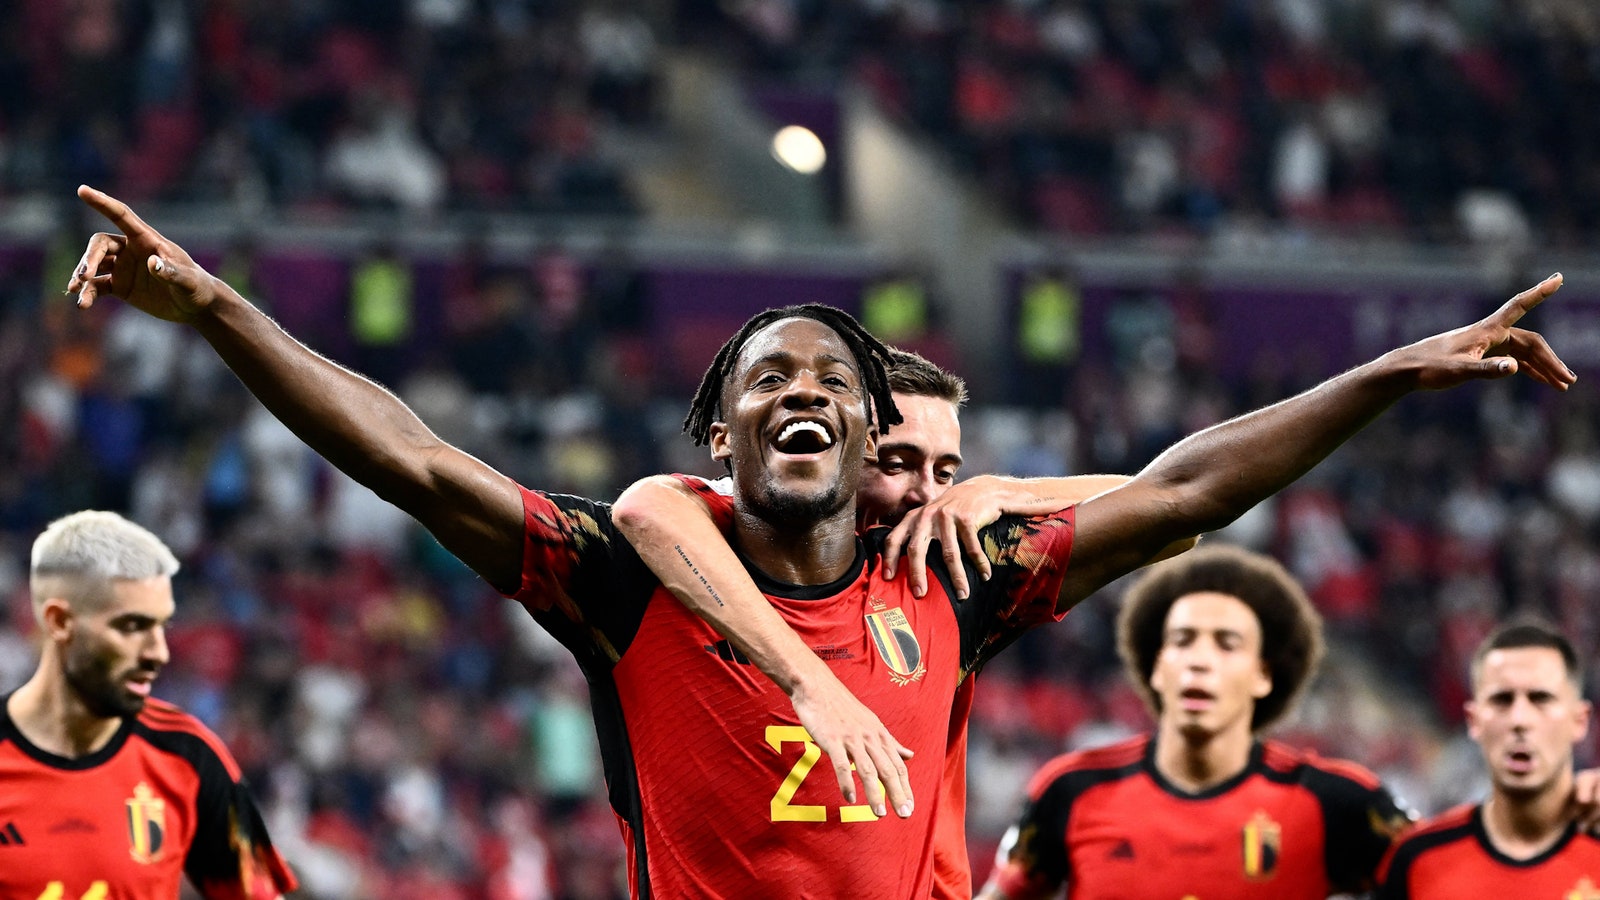 Belgium's Michy Batshuayi scores a goal against Canada in the 44th minute